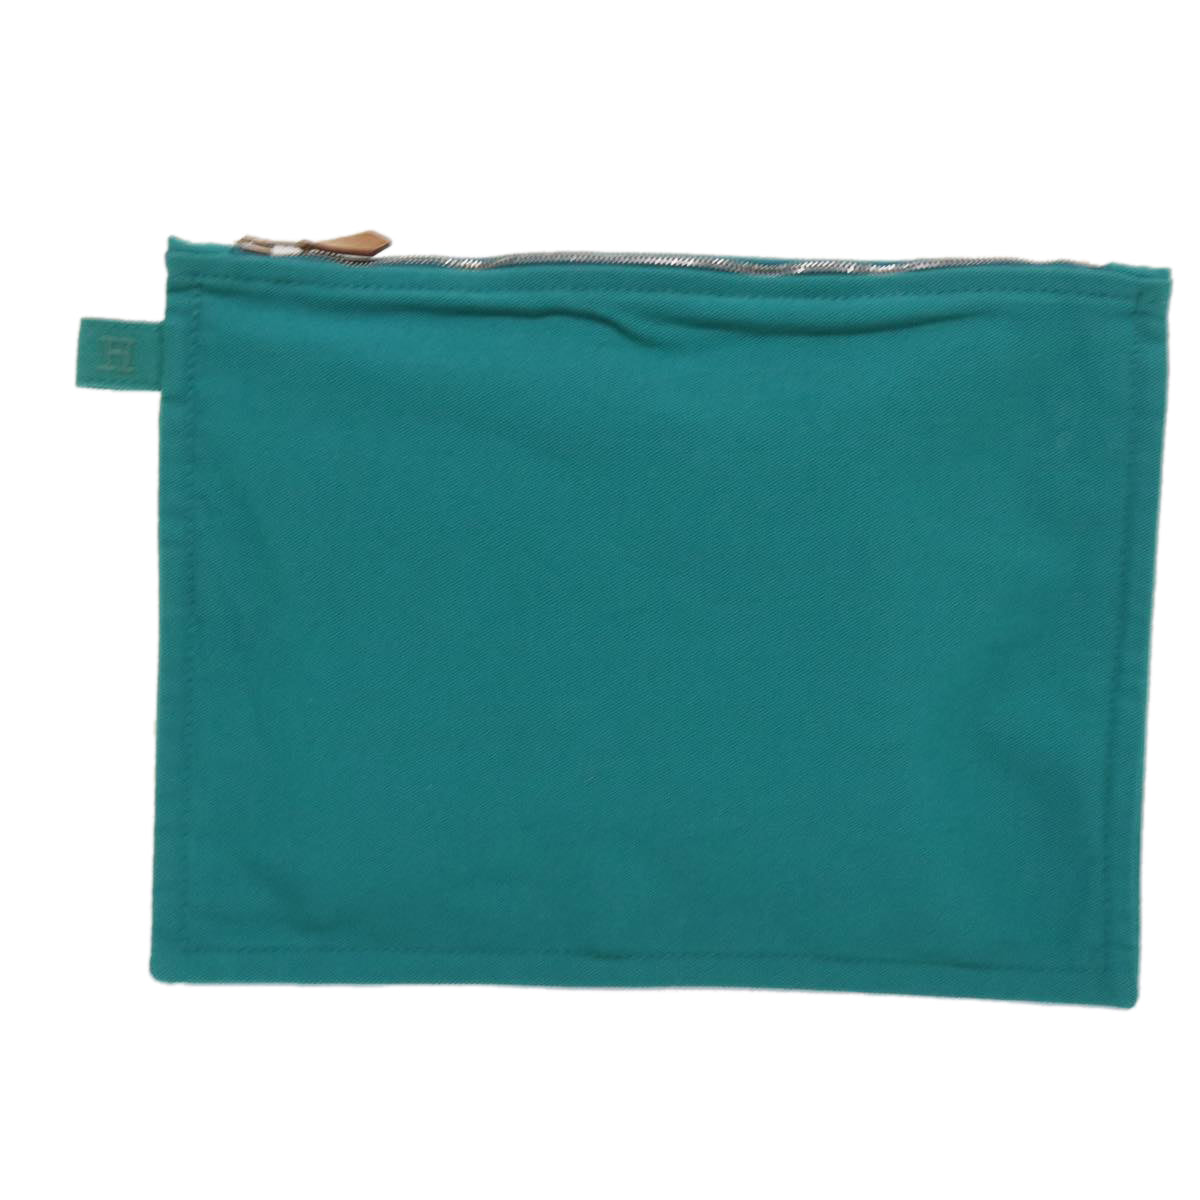 HERMES Pouch Canvas Turquoise Blue Auth ep3072 - 0